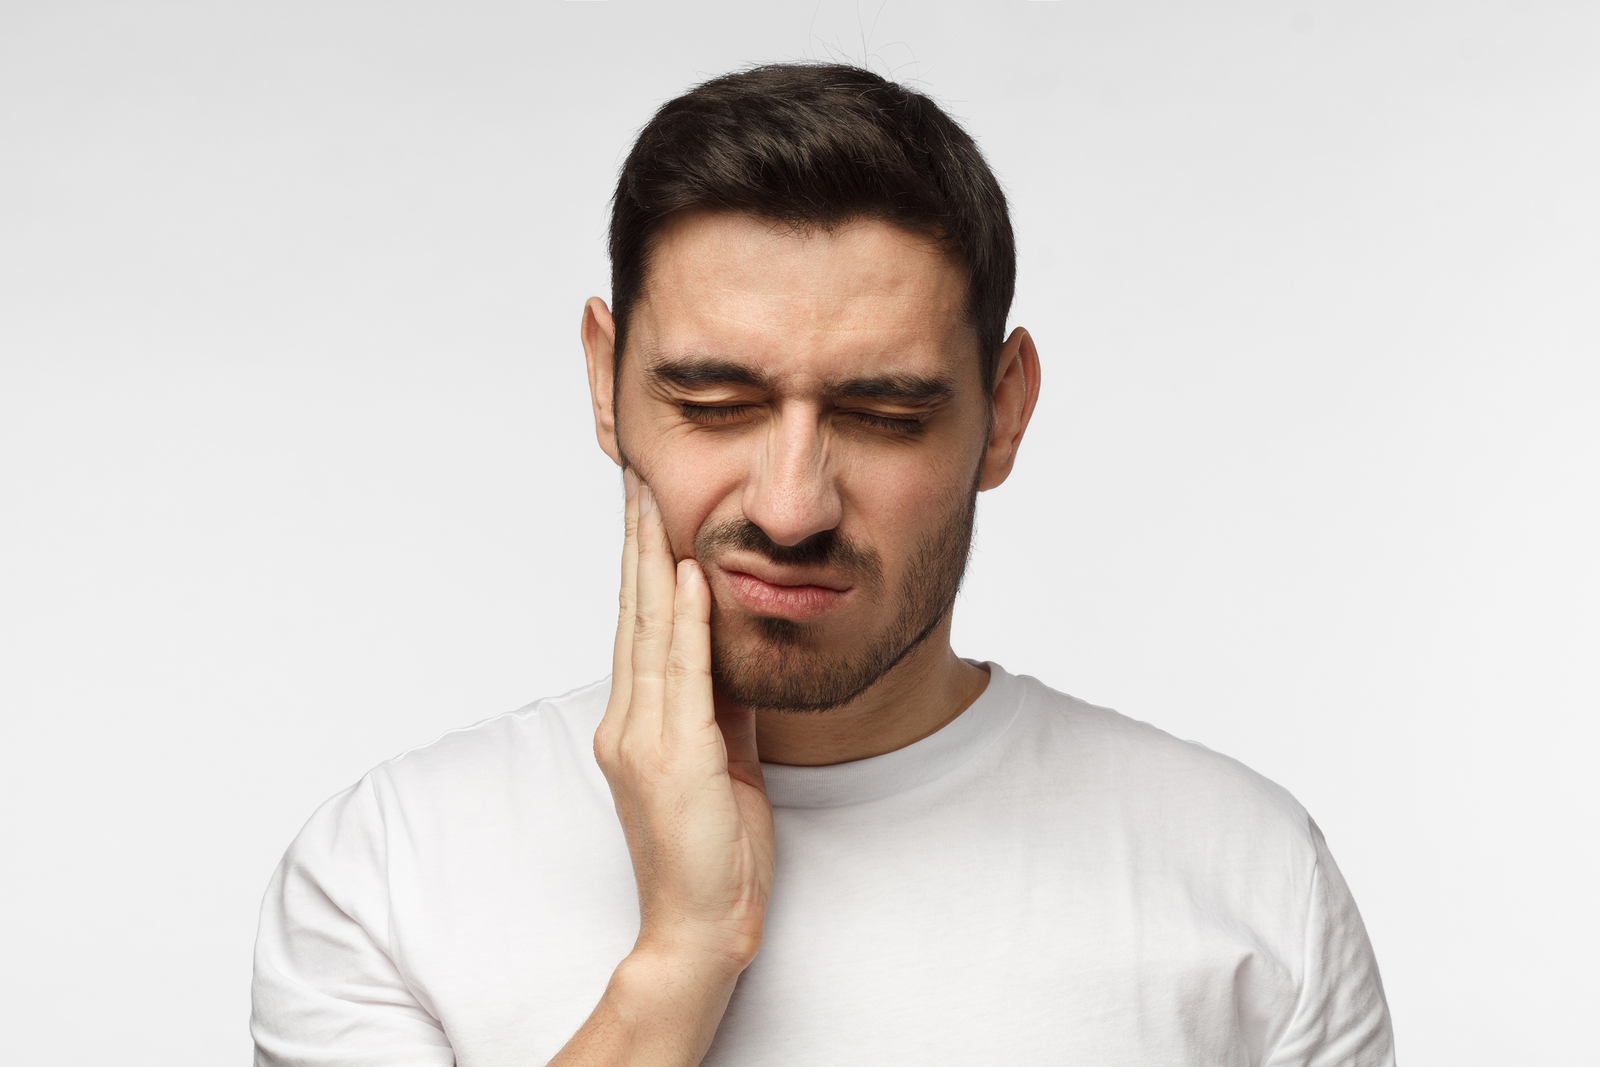 Do You Know the Root of Your Dental Pain?